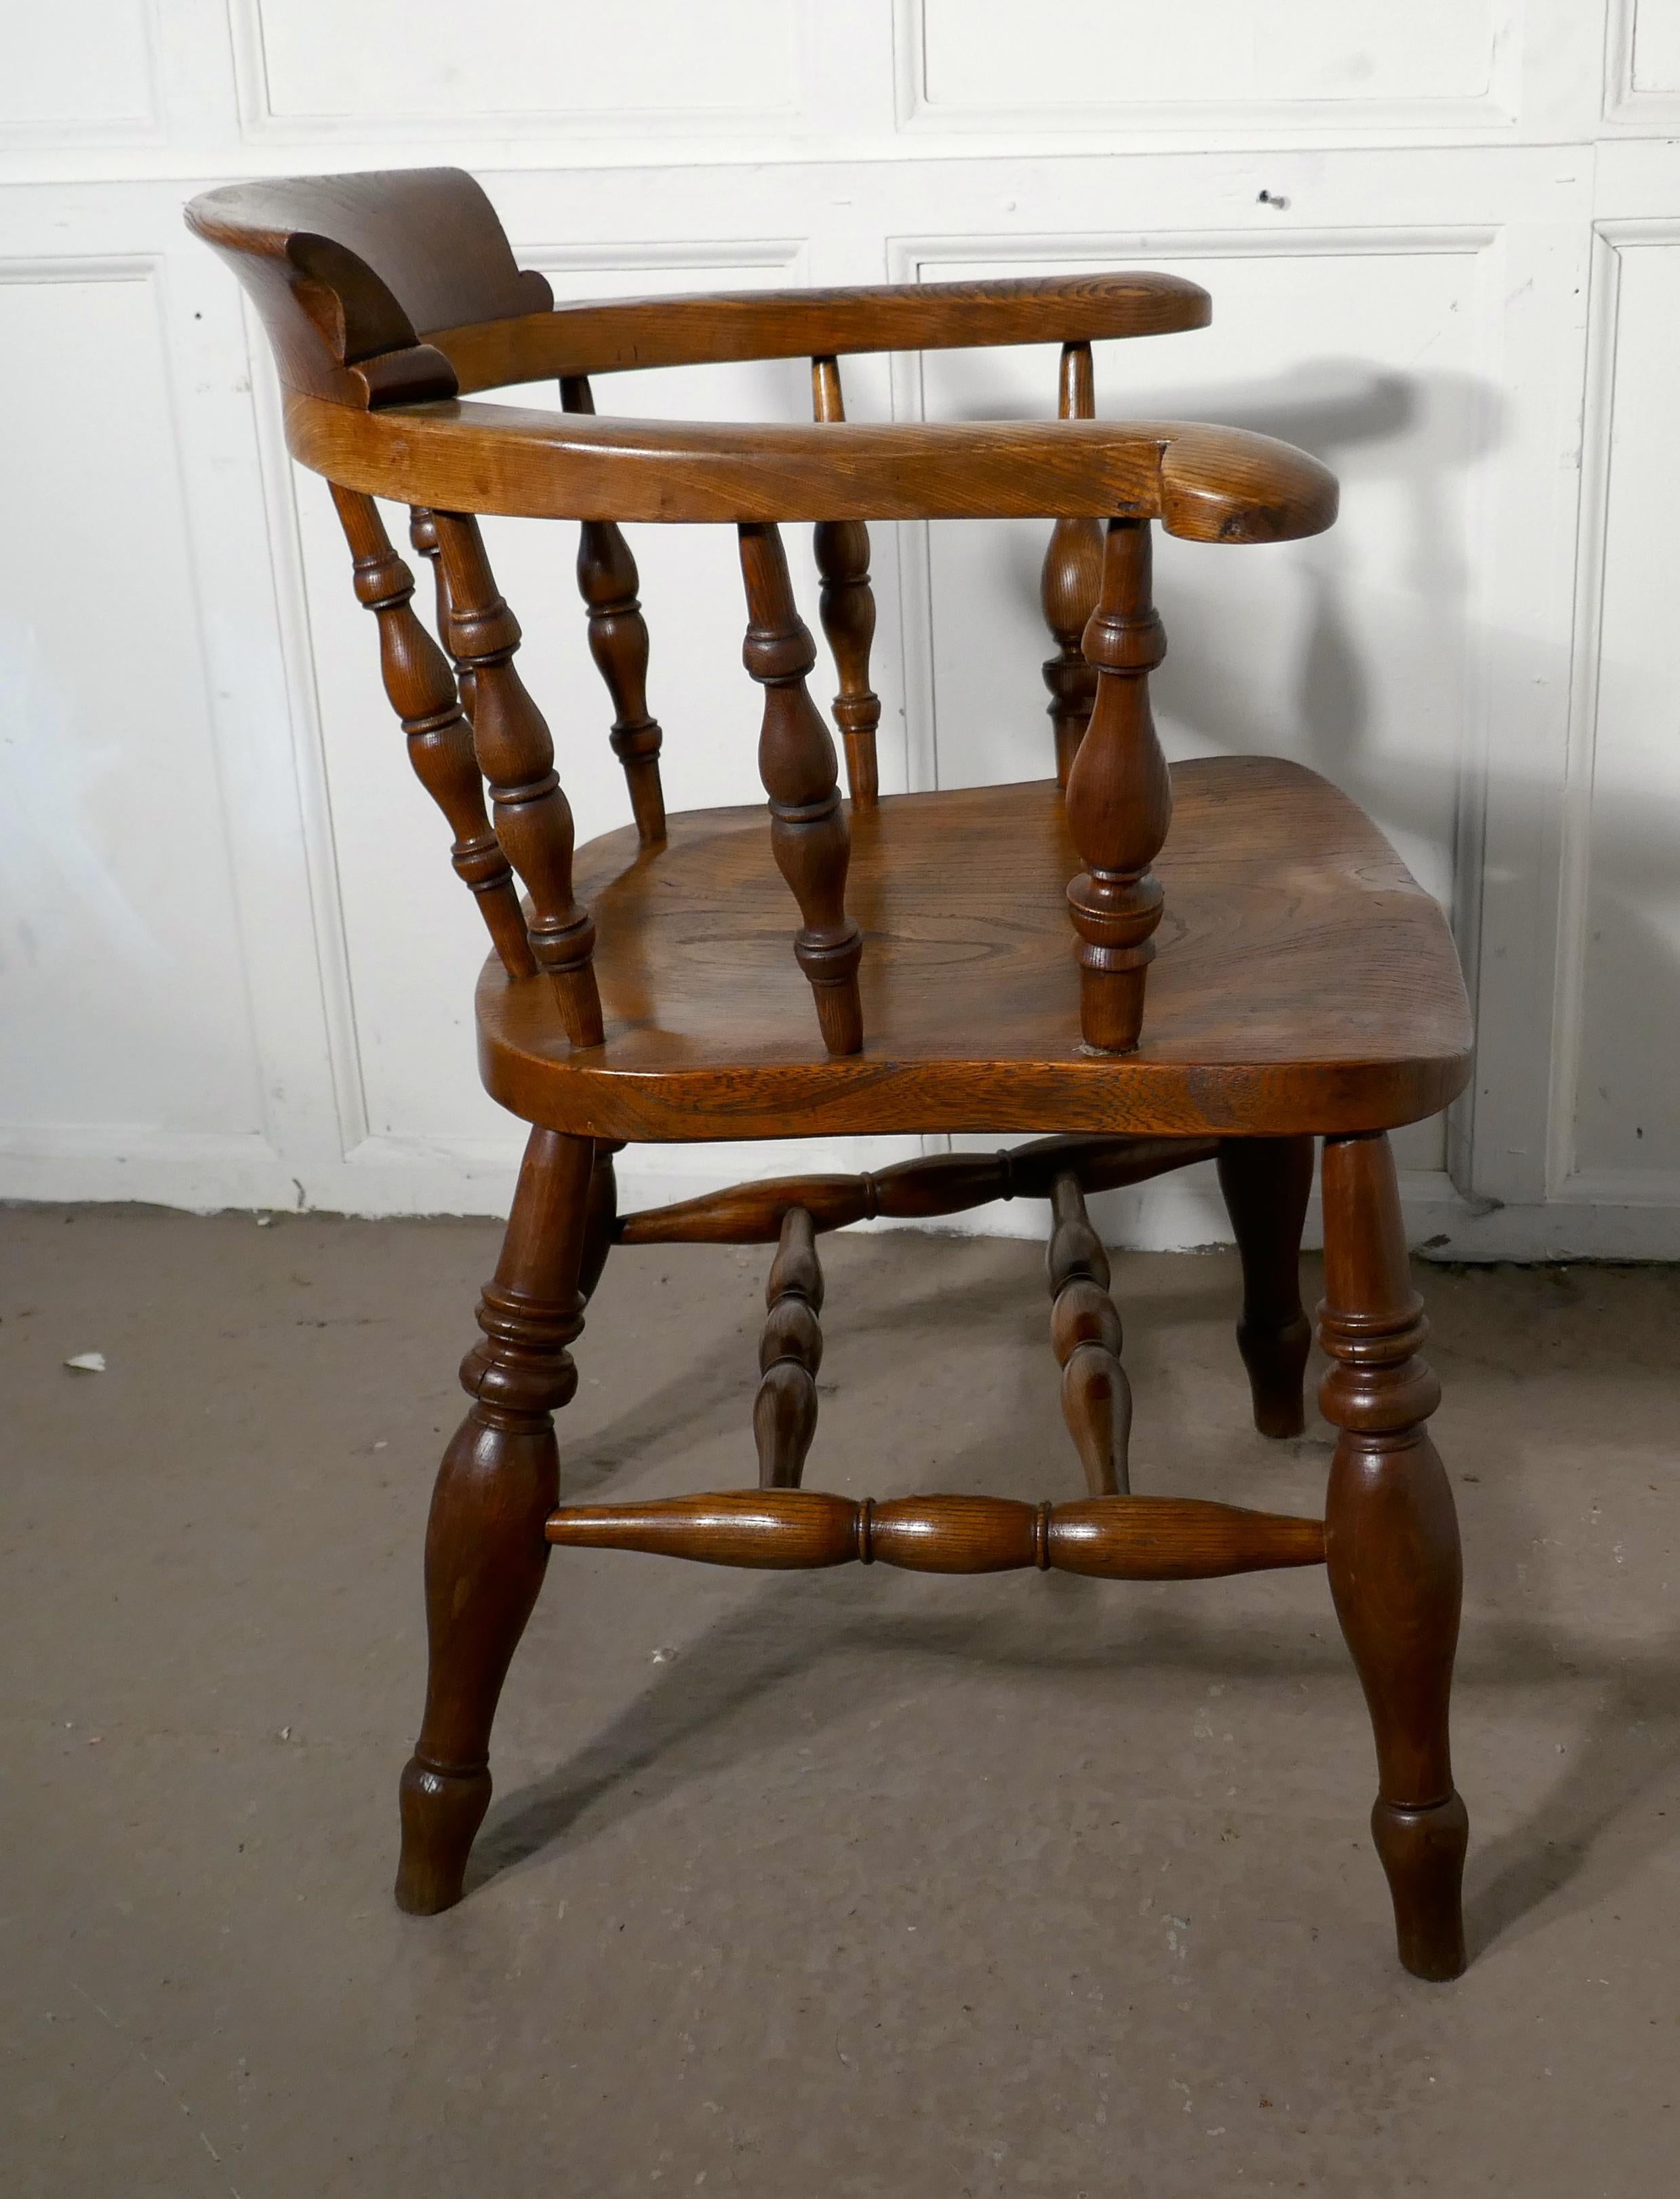 19th century elm and ash smokers bow office or desk chair

This solid chair has an attractive thick saddle shaped seat in Elm, it has a very wide curved top rail in Ash and chunky turned spindles beneath 

The chair stands on very attractive